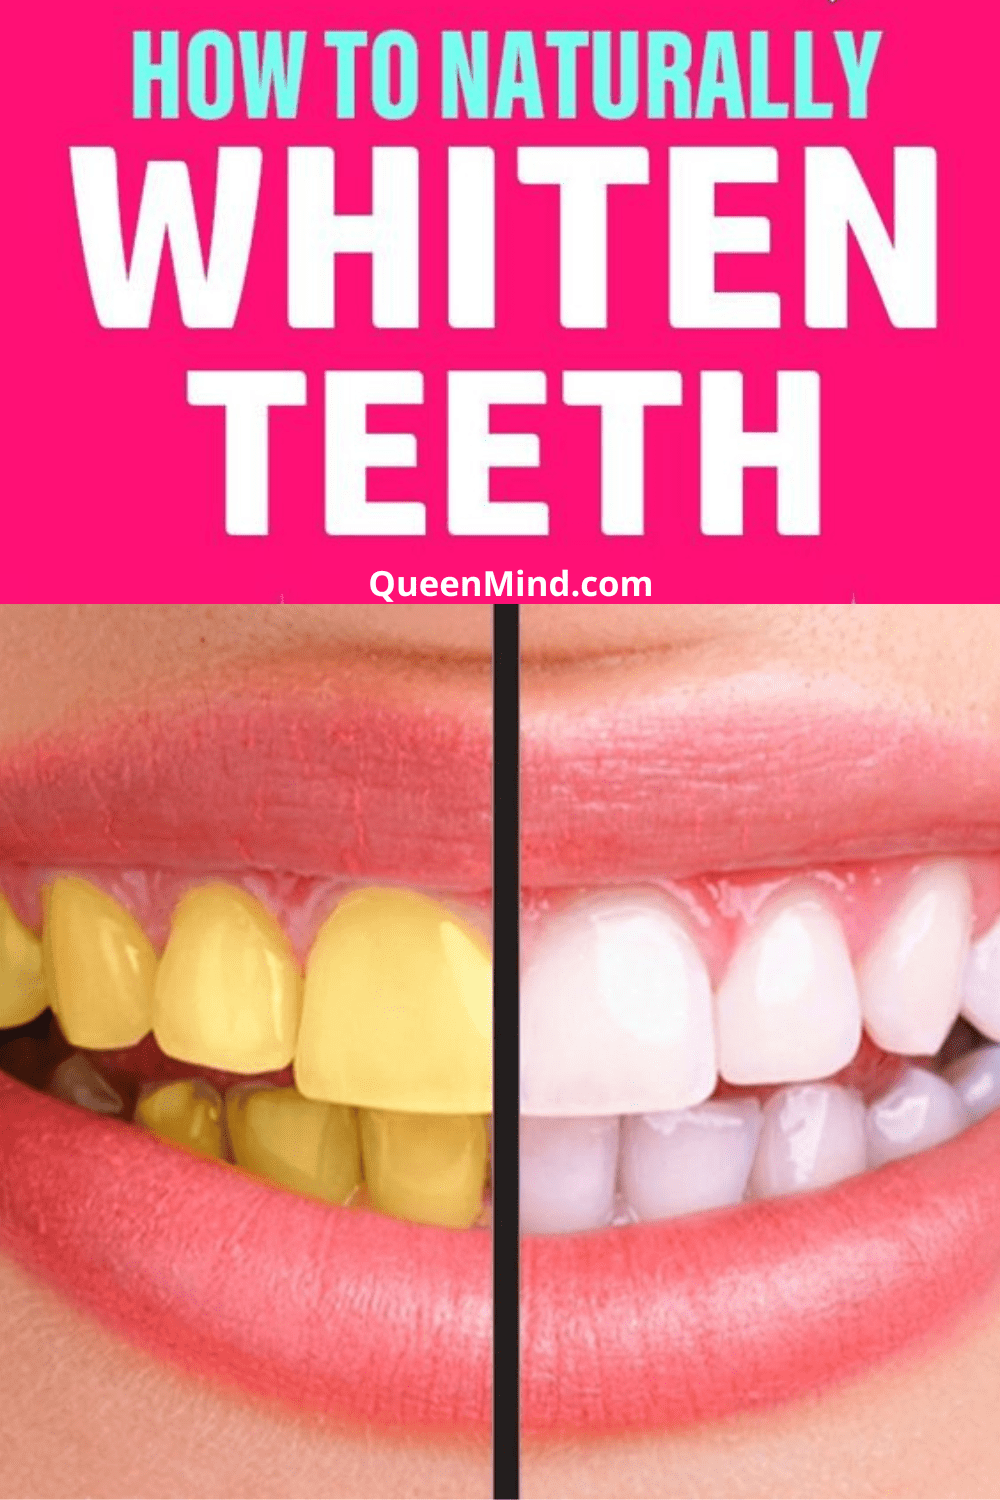 How to Get Whiter Teeth at Home Naturally